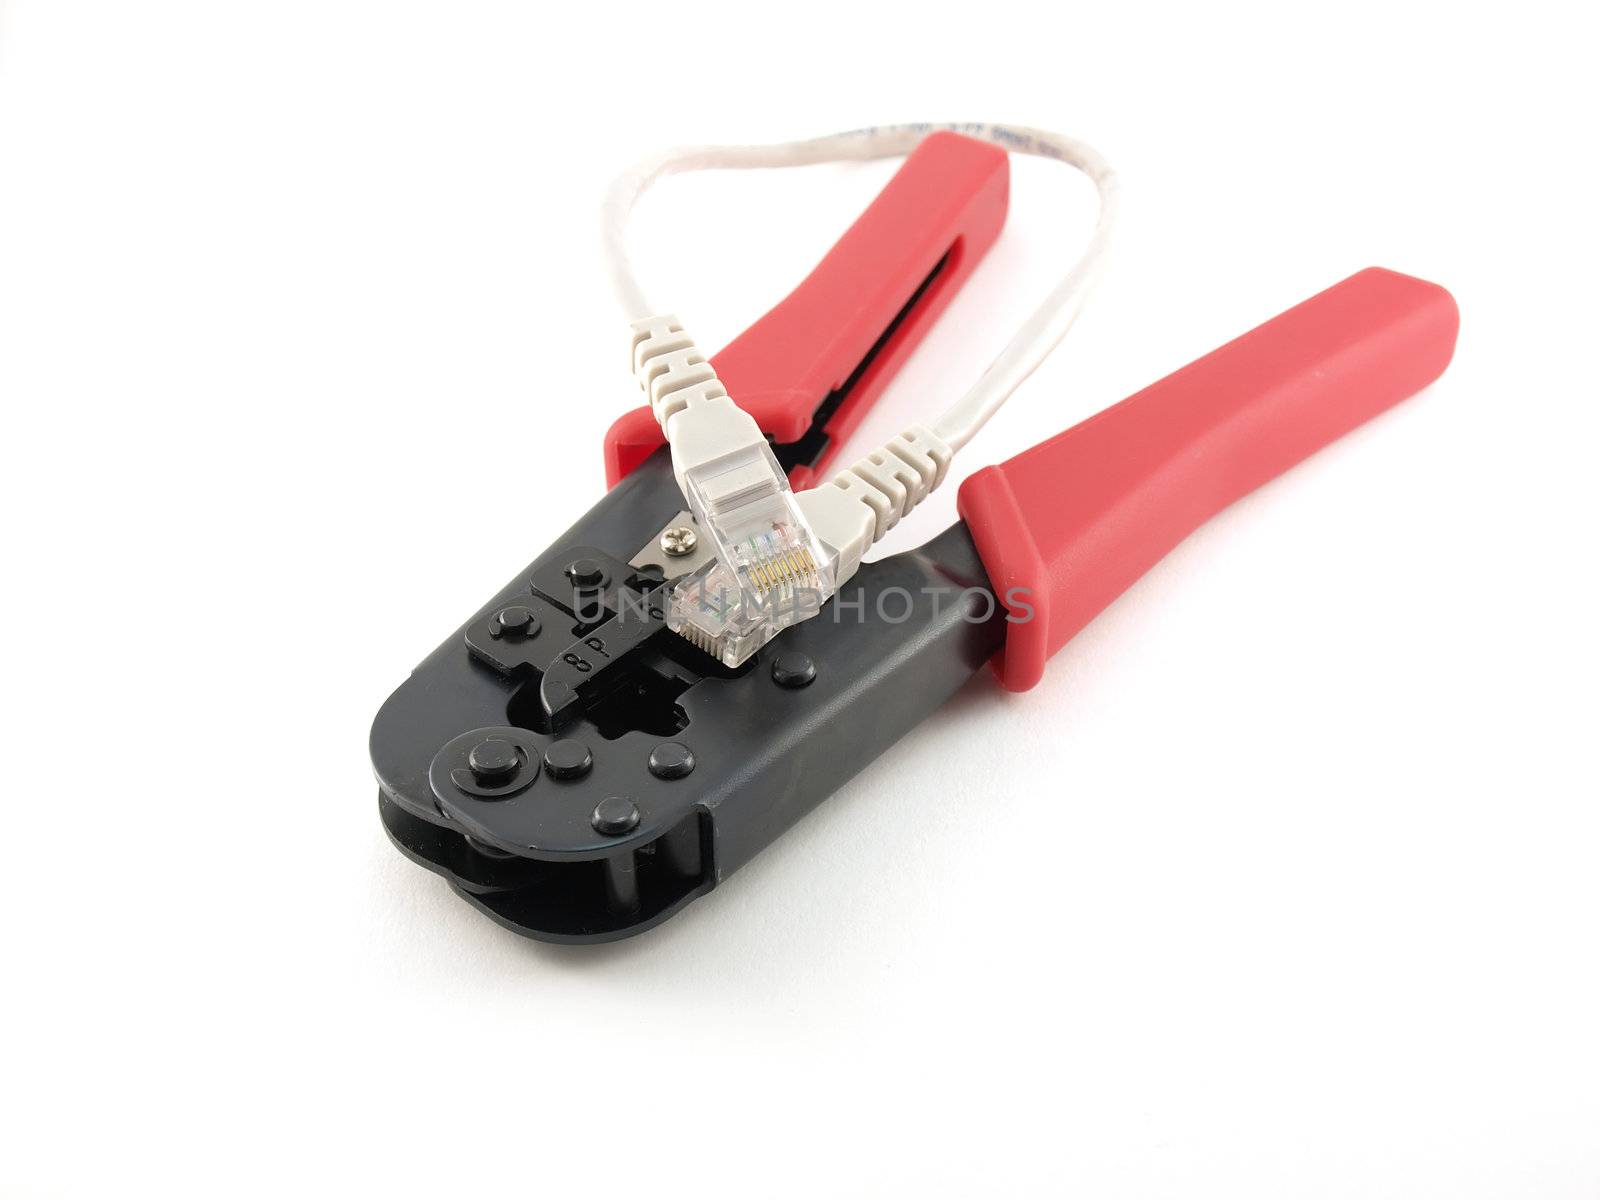 Tool for crimping network cable by sergpet